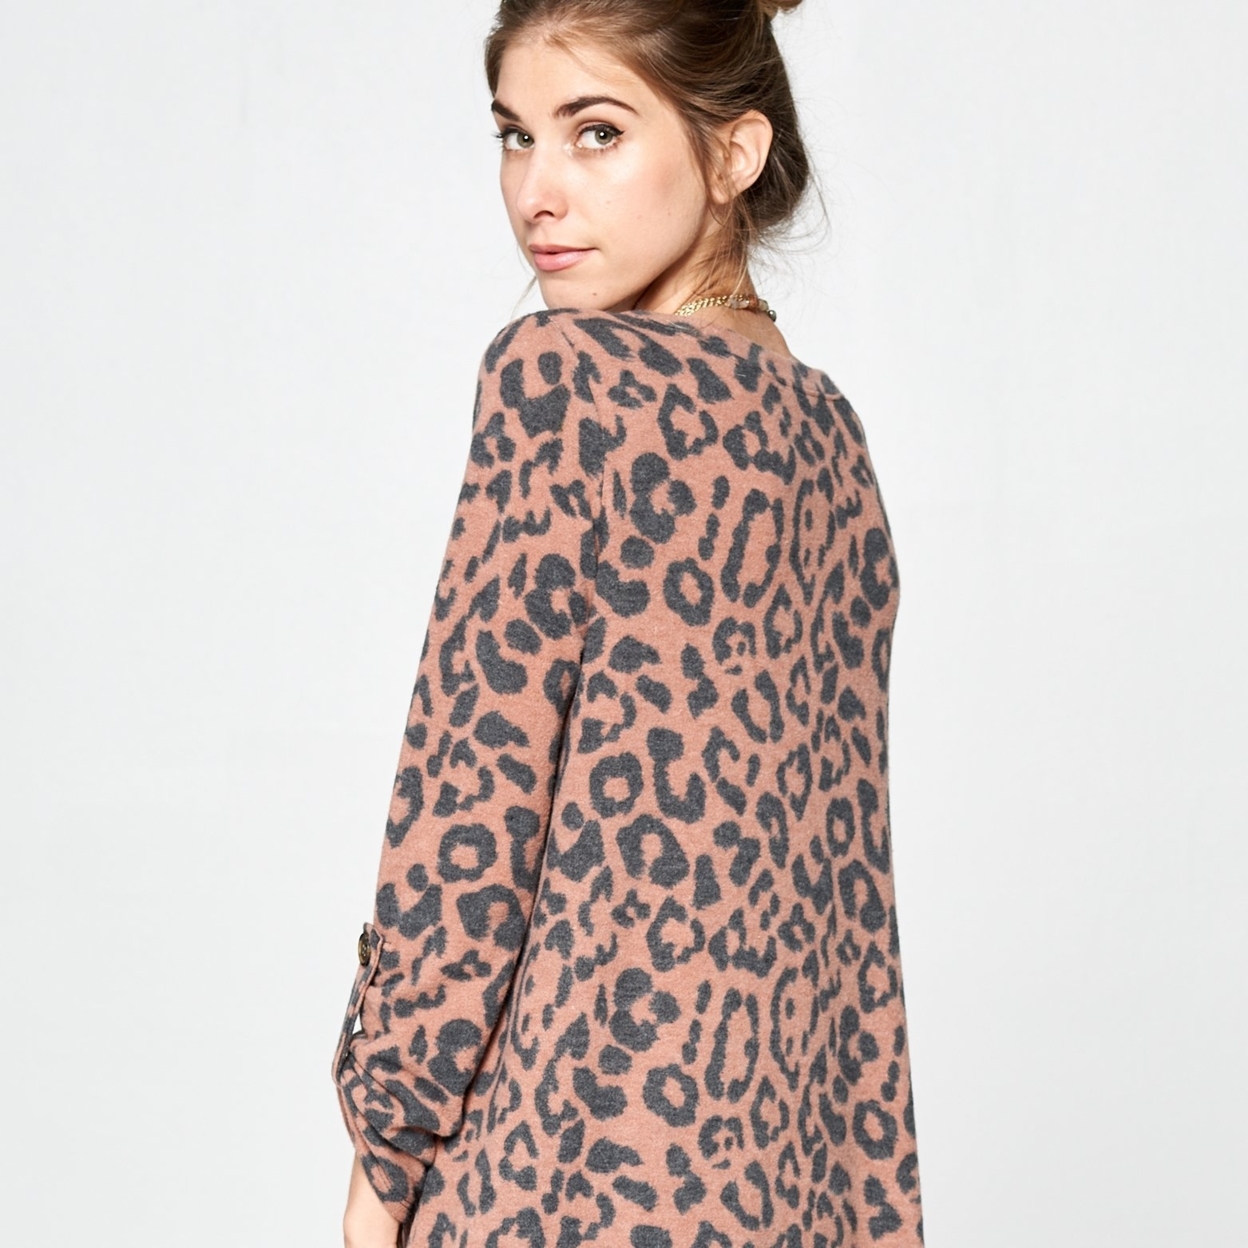 Three-Quarter Sleeve Leopard Tunic - Taupe/charcoal, Large (12-14)